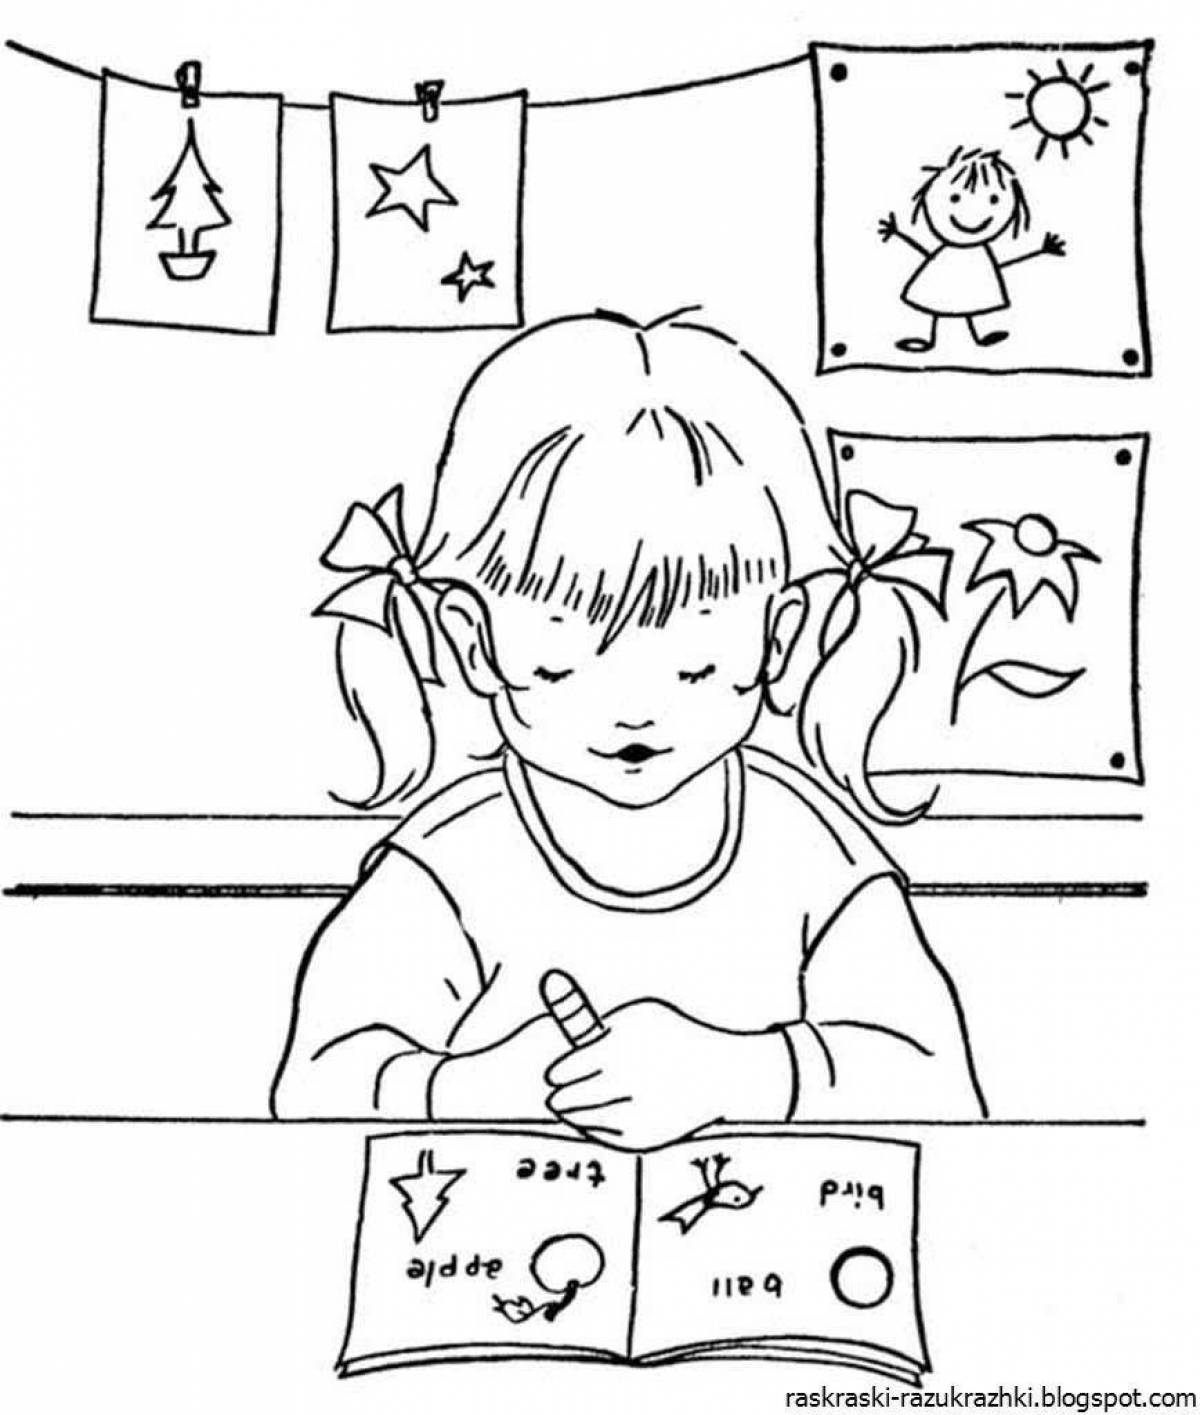 Color-frenzy school day schedule coloring page